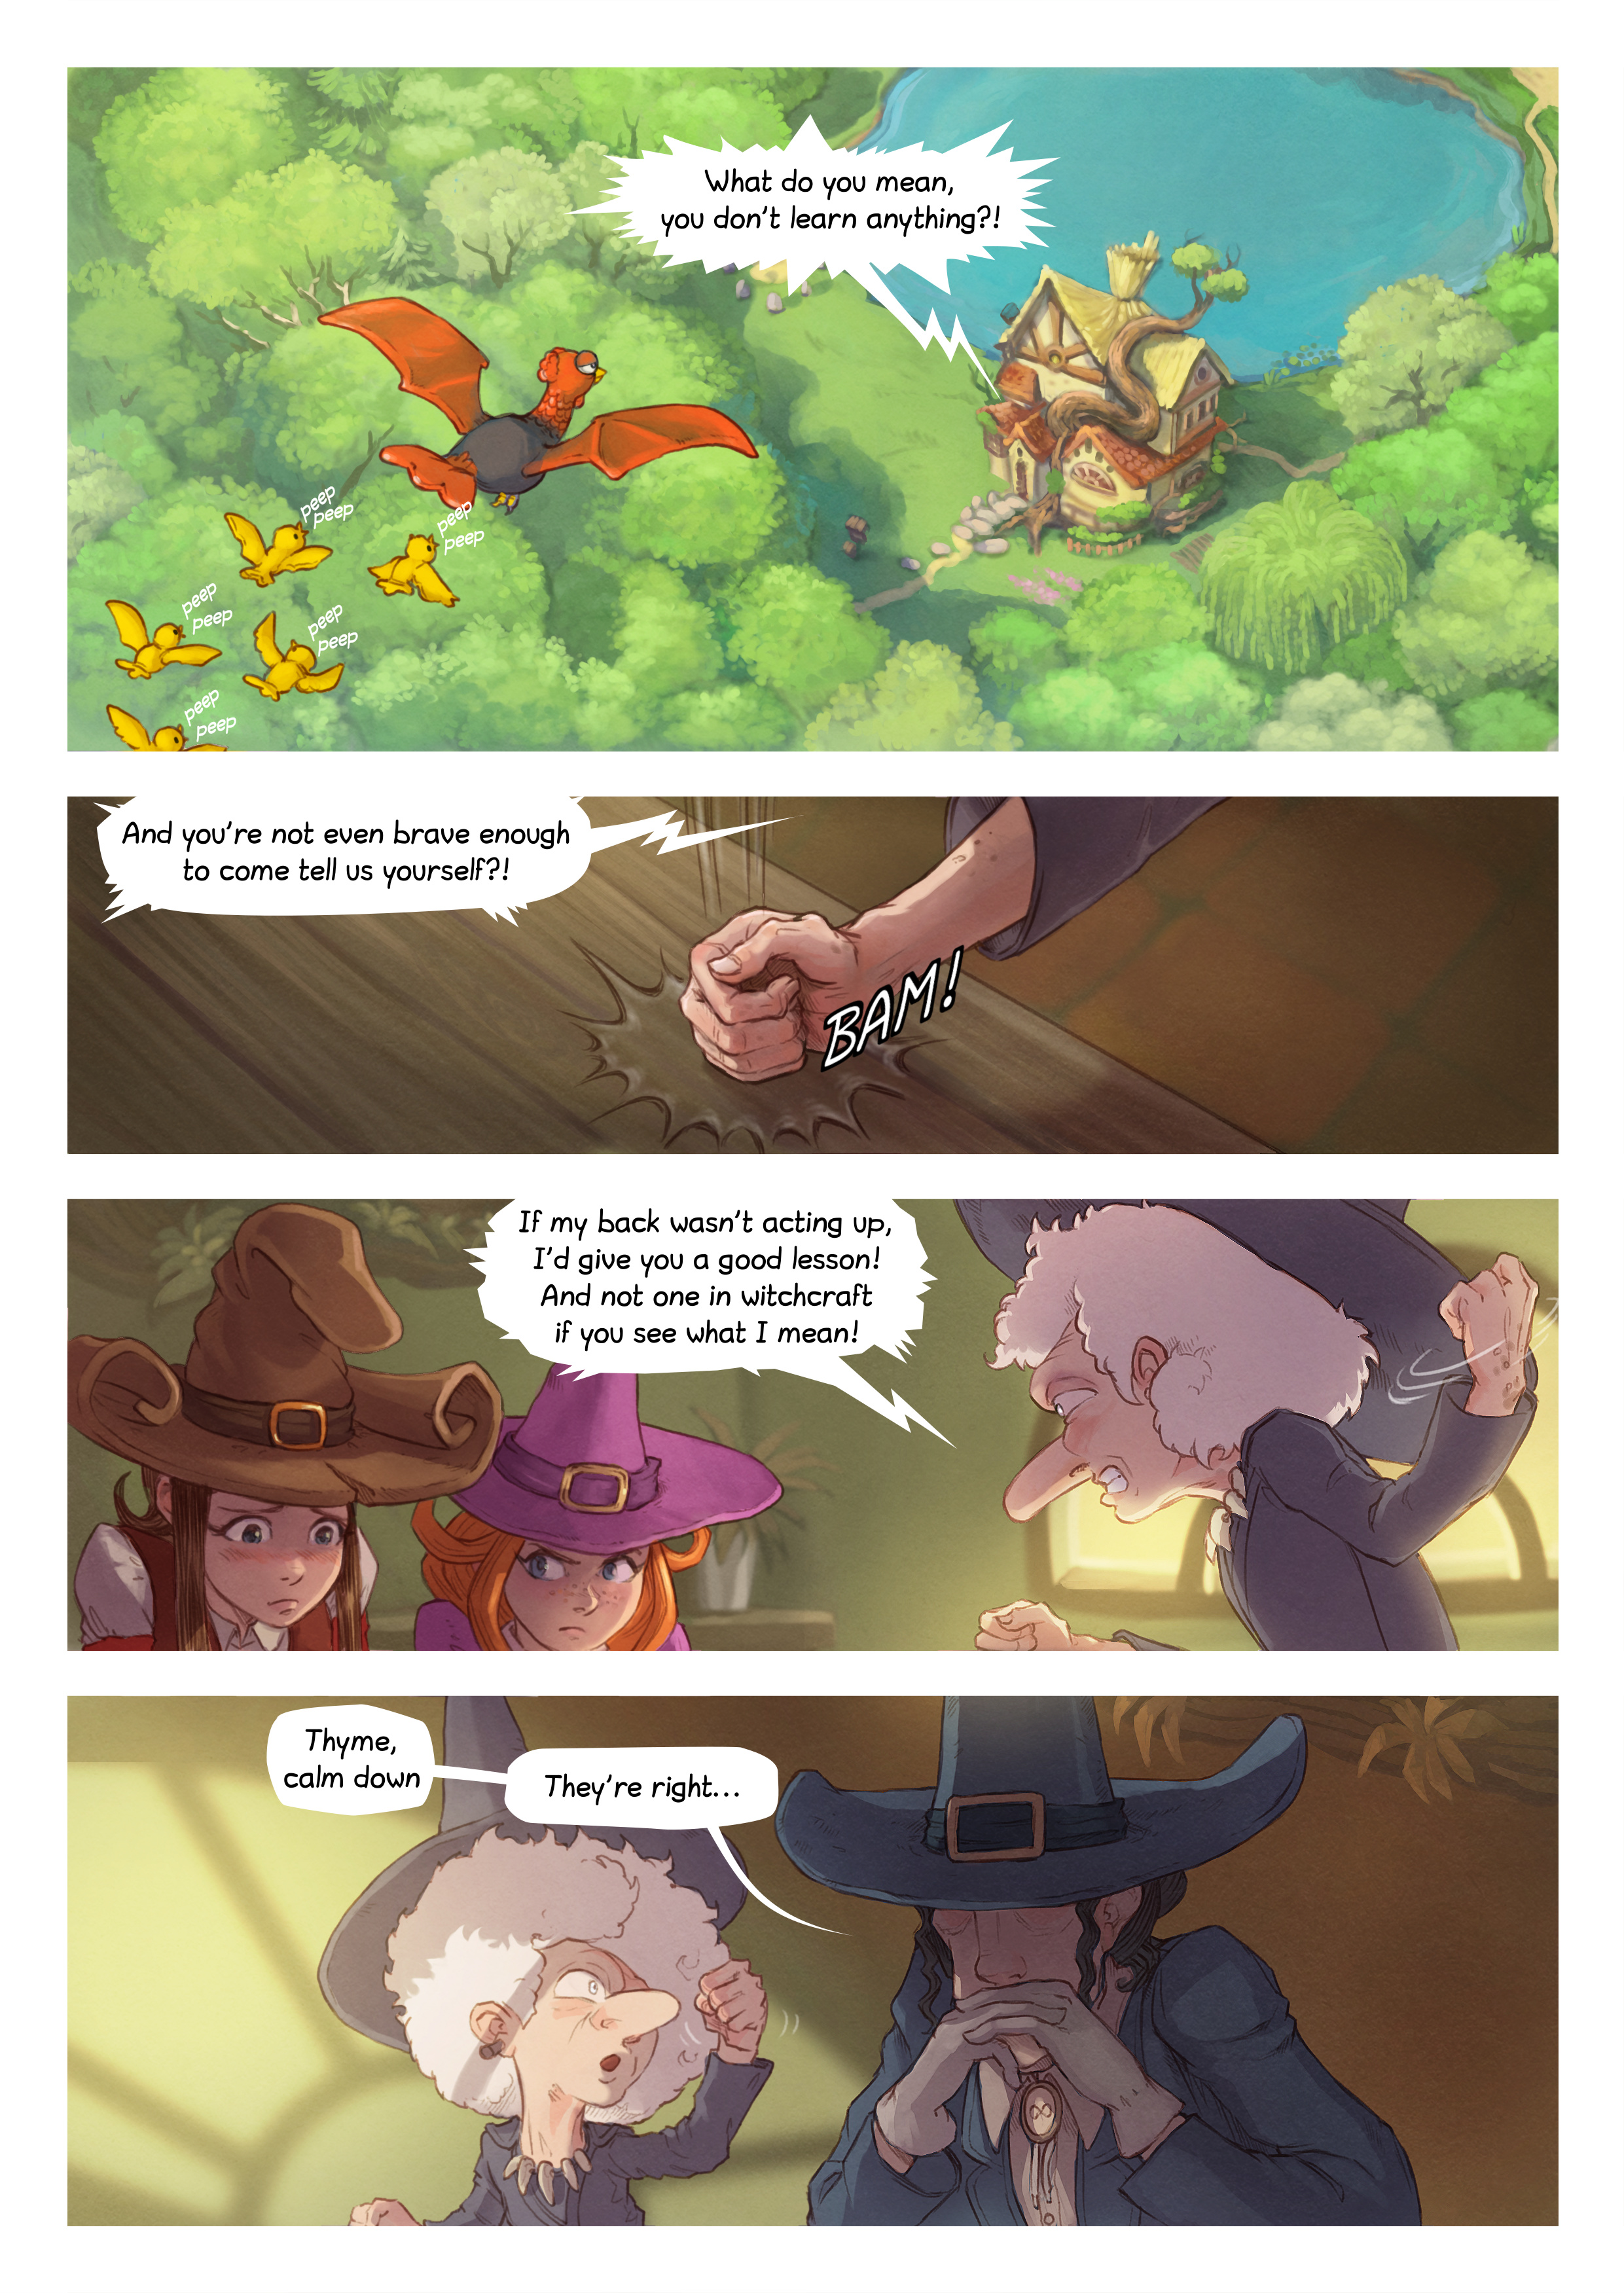 Episode 16: The Sage of the Mountain, Page 3